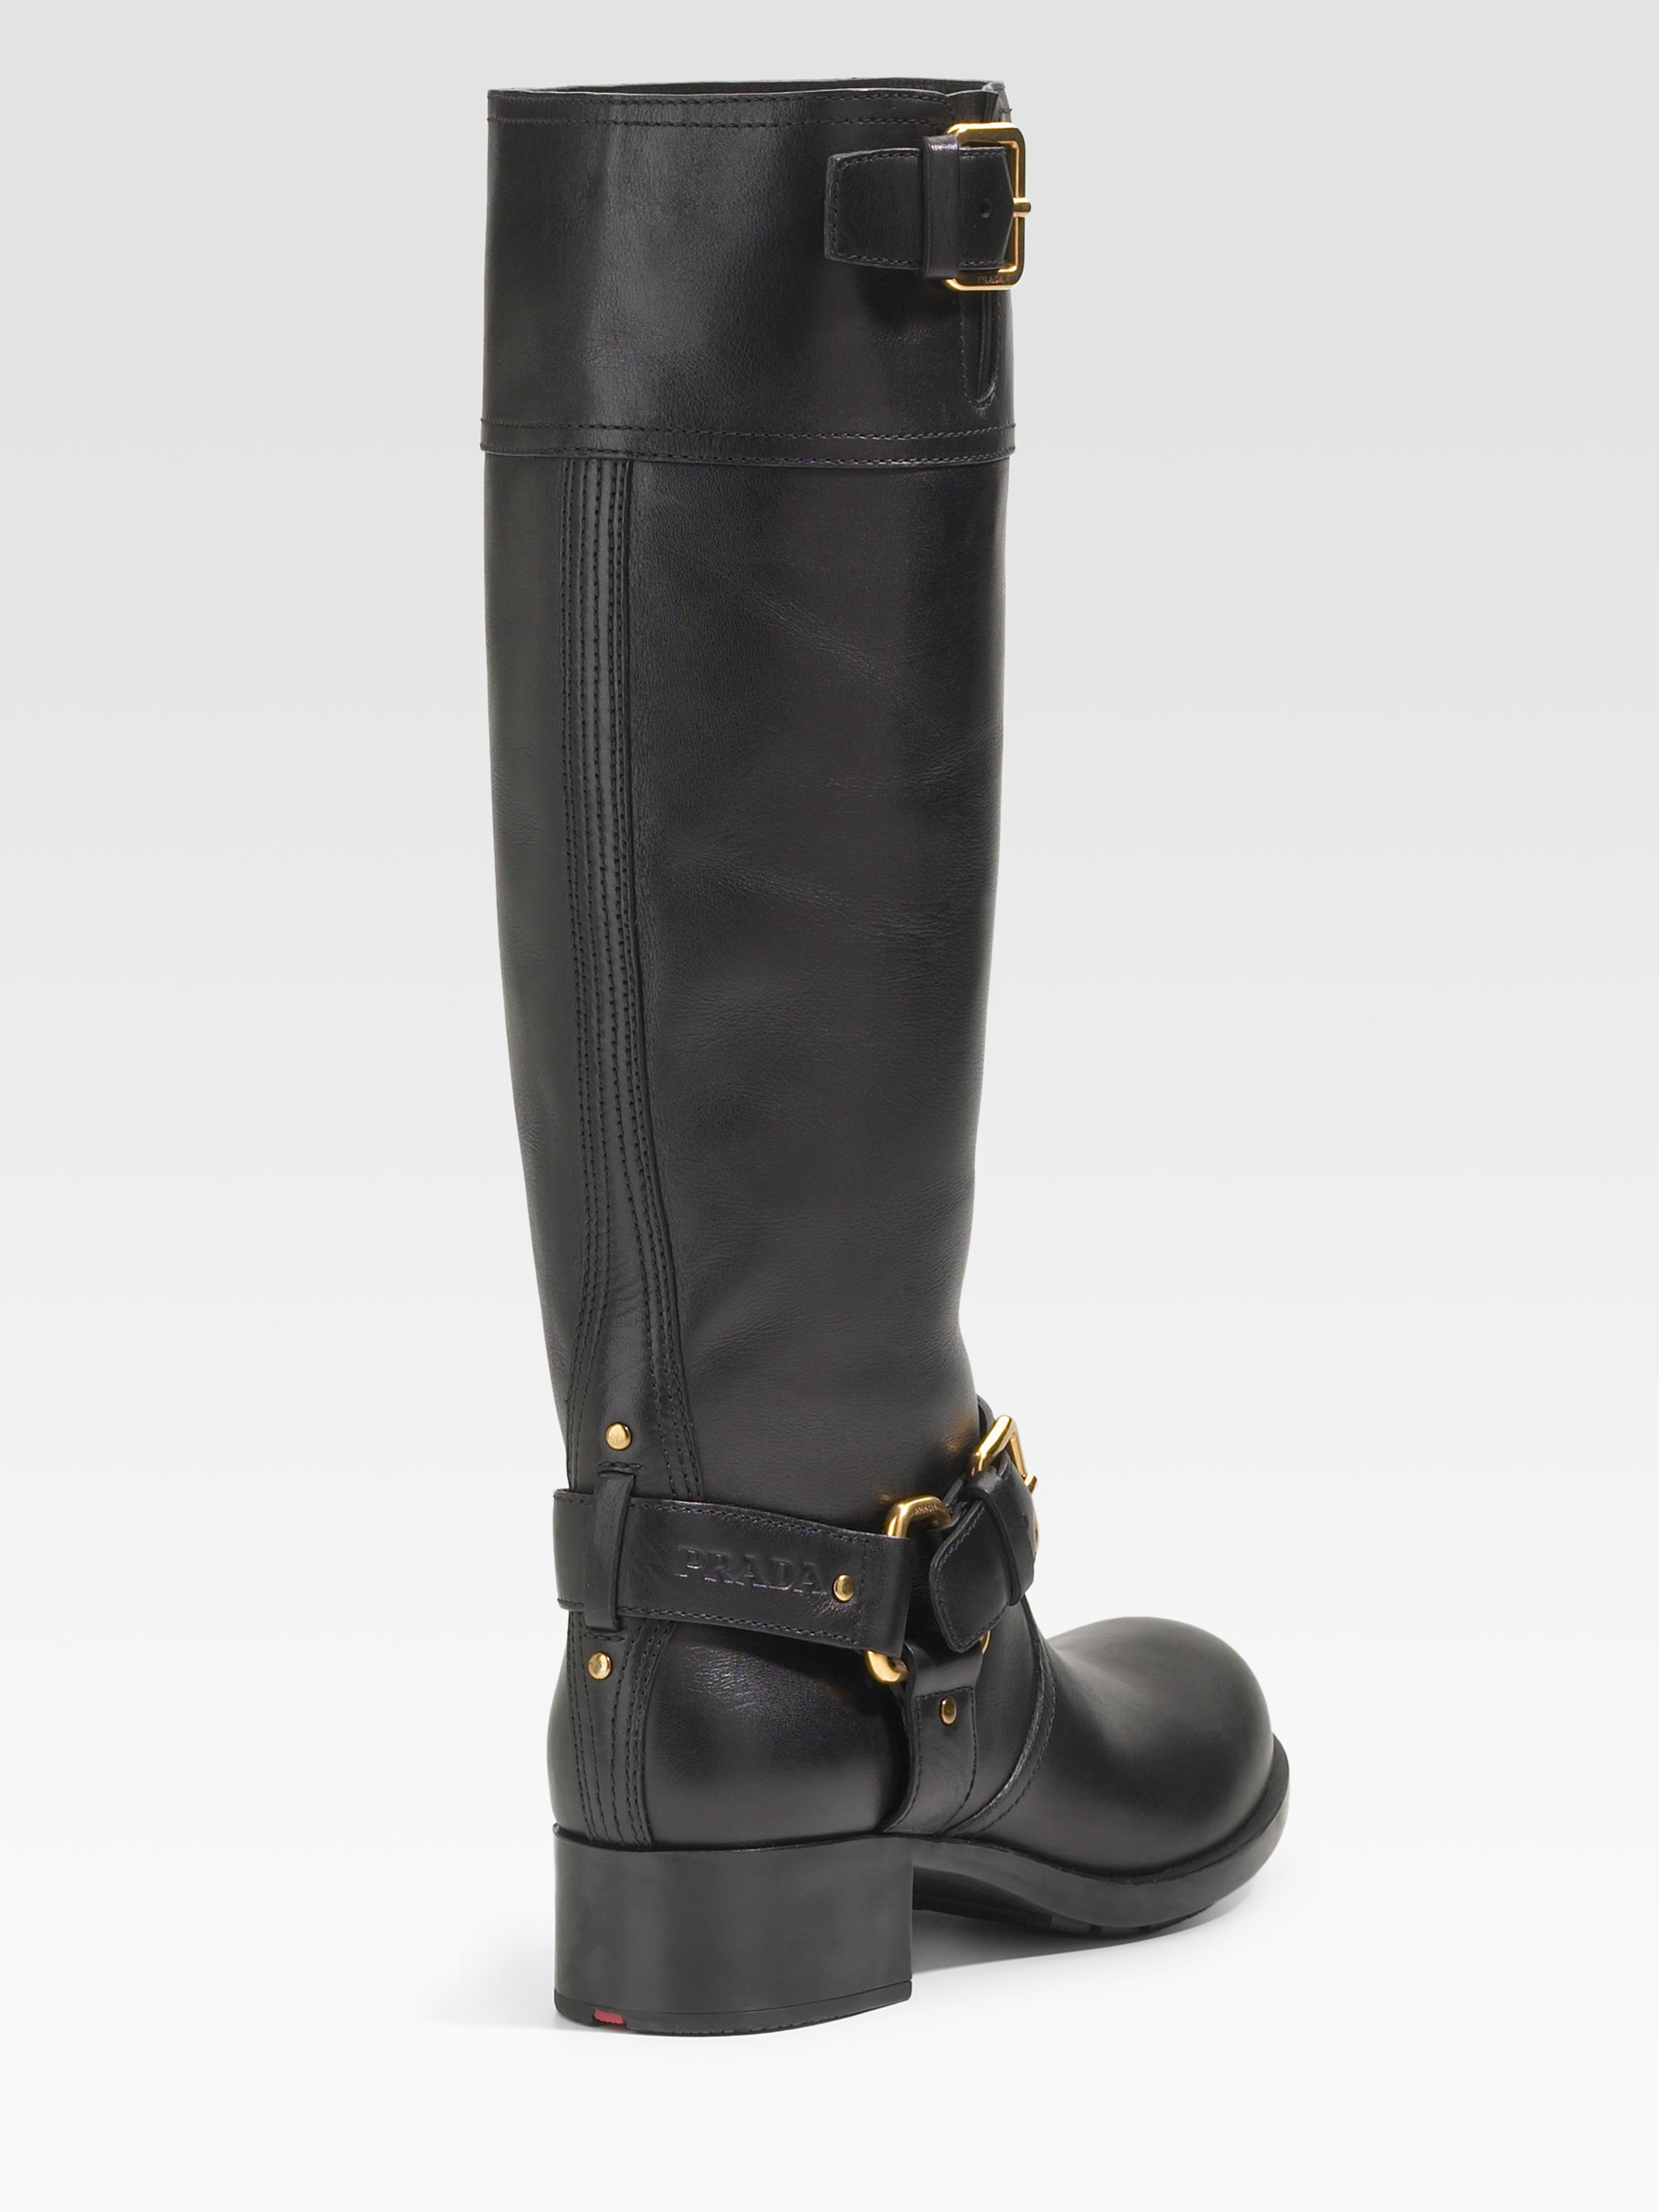 Prada Lugsole Motorcycle Boots in Black Lyst